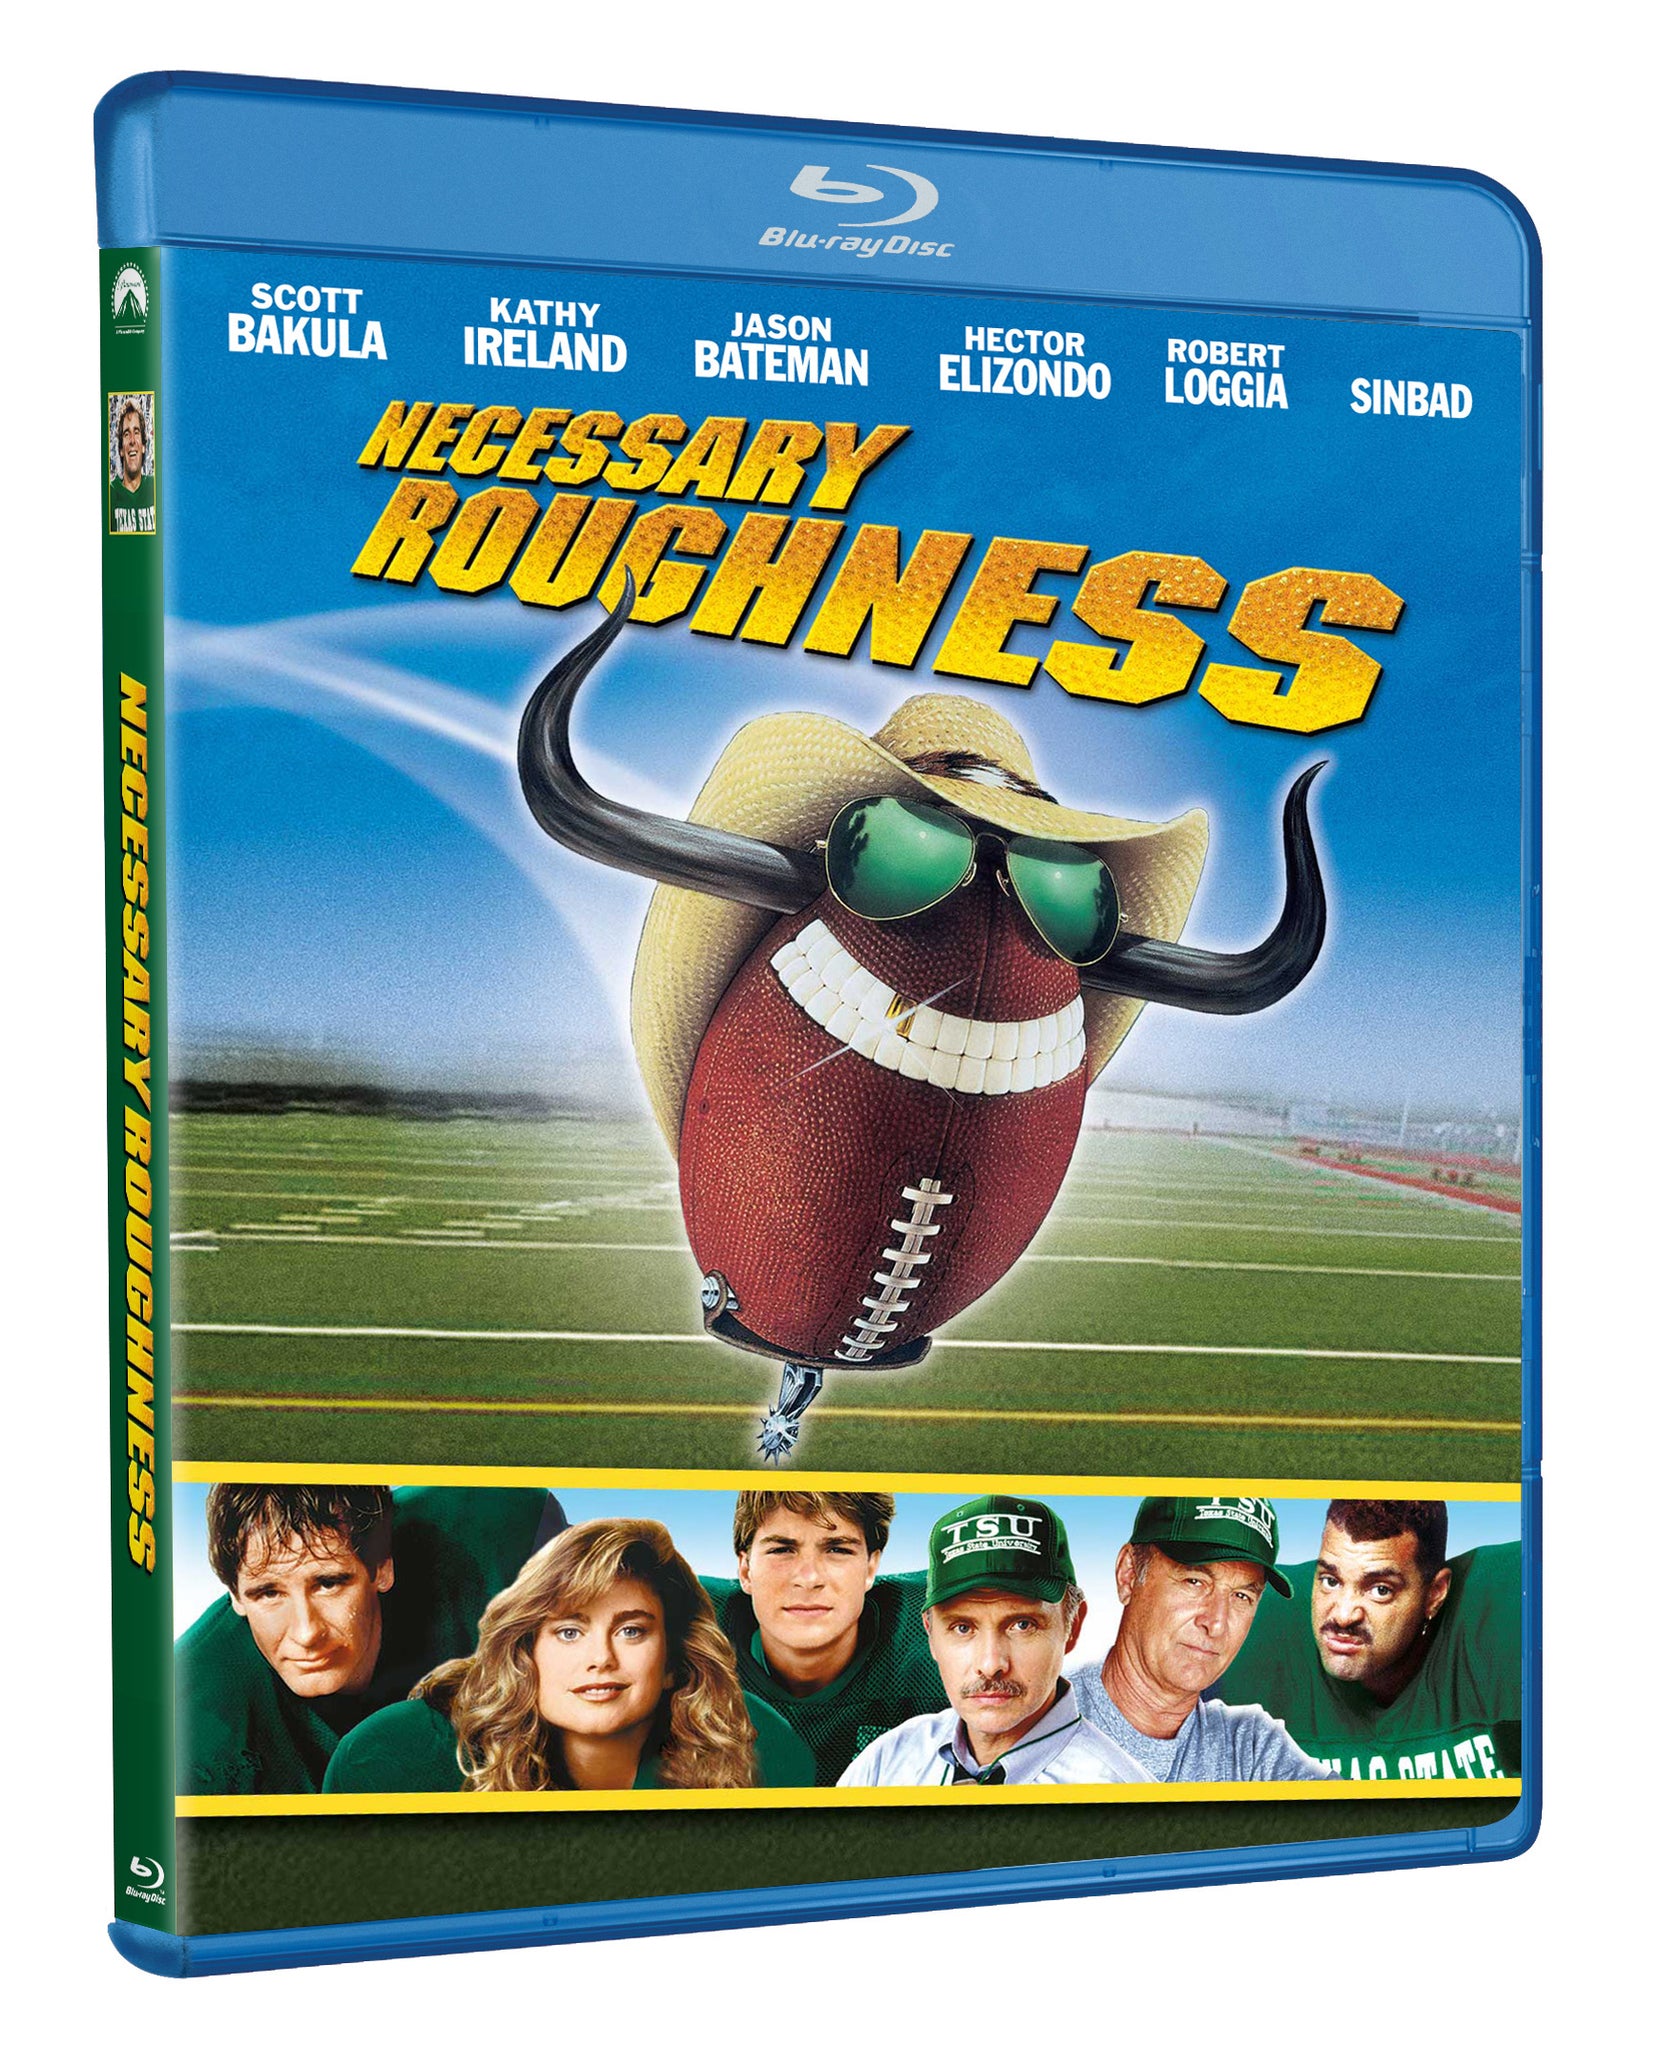 Necessary Roughness [Blu-ray] cover art